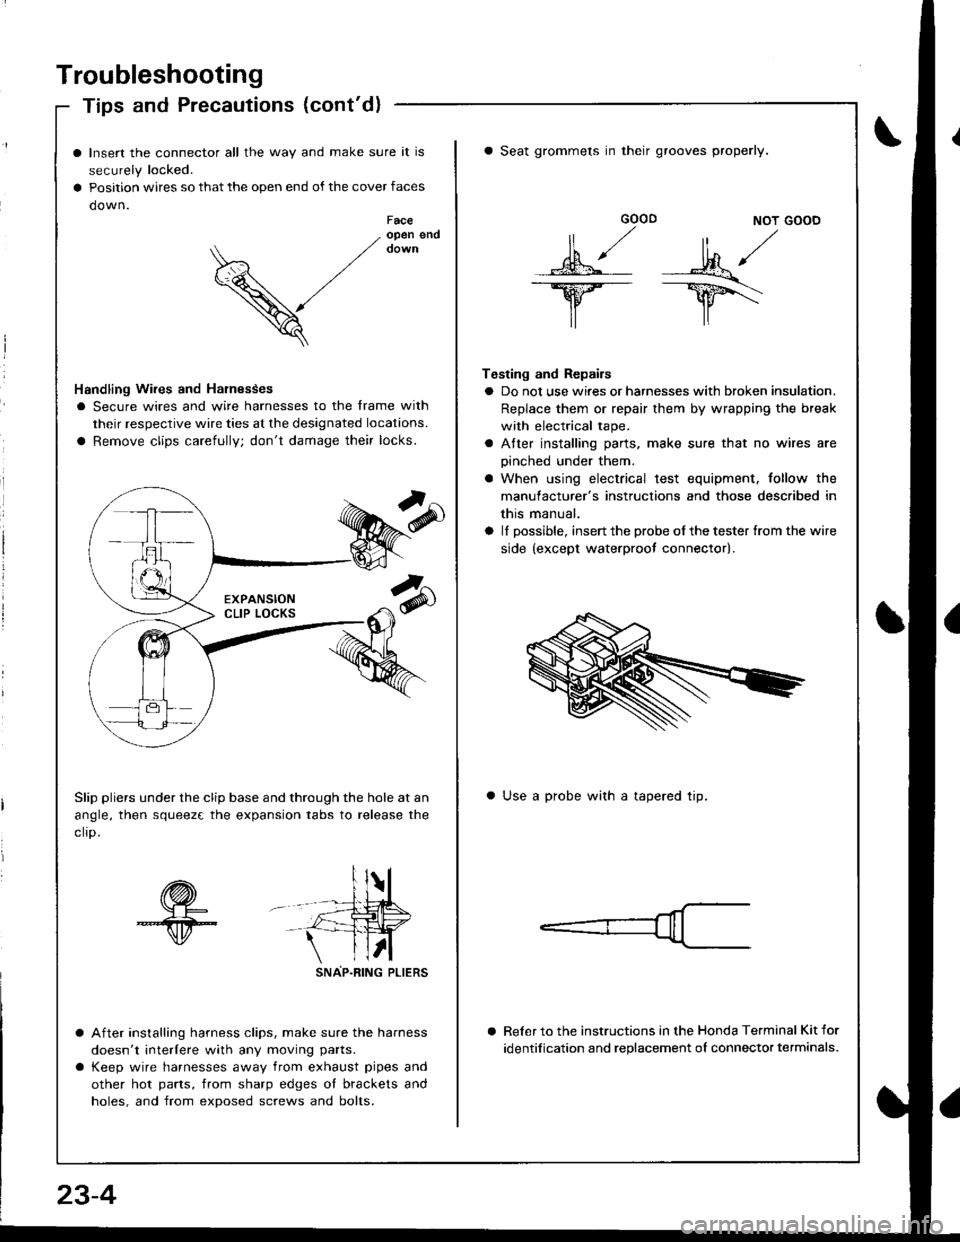 HONDA INTEGRA 1998 4.G Owners Manual Troubleshooting
Tips and Precautions (contd)
Insert the connector all the way and make sure it is
securely locked.
Position wires so that the open end of the cover faces
down.Faceopen end
V
Handling 